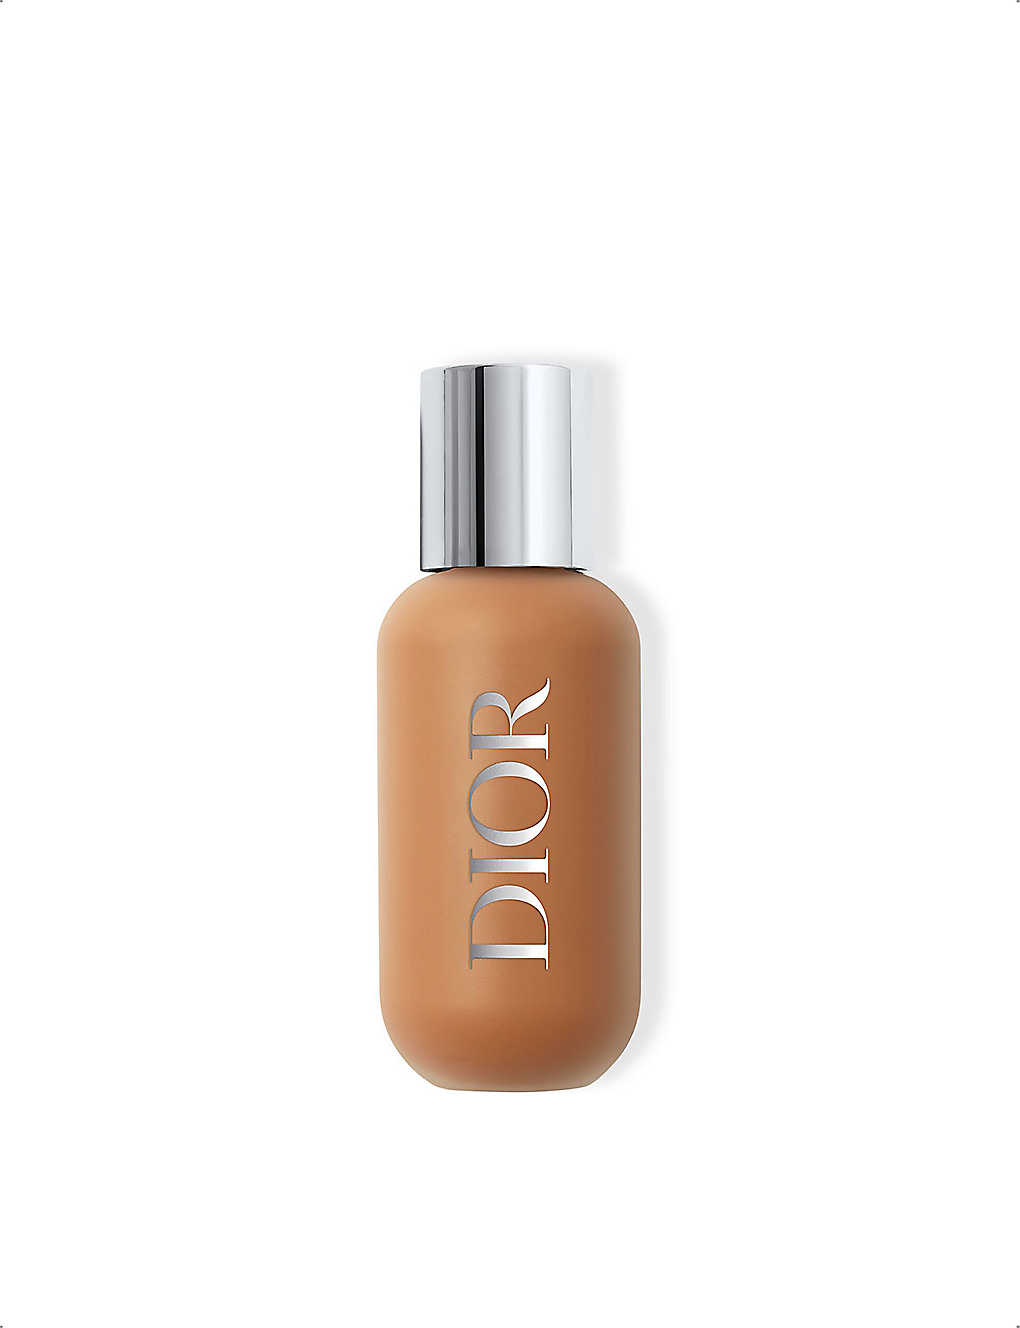 Dior Nude (lingerie) Backstage Face & Body Foundation 50ml In 6w